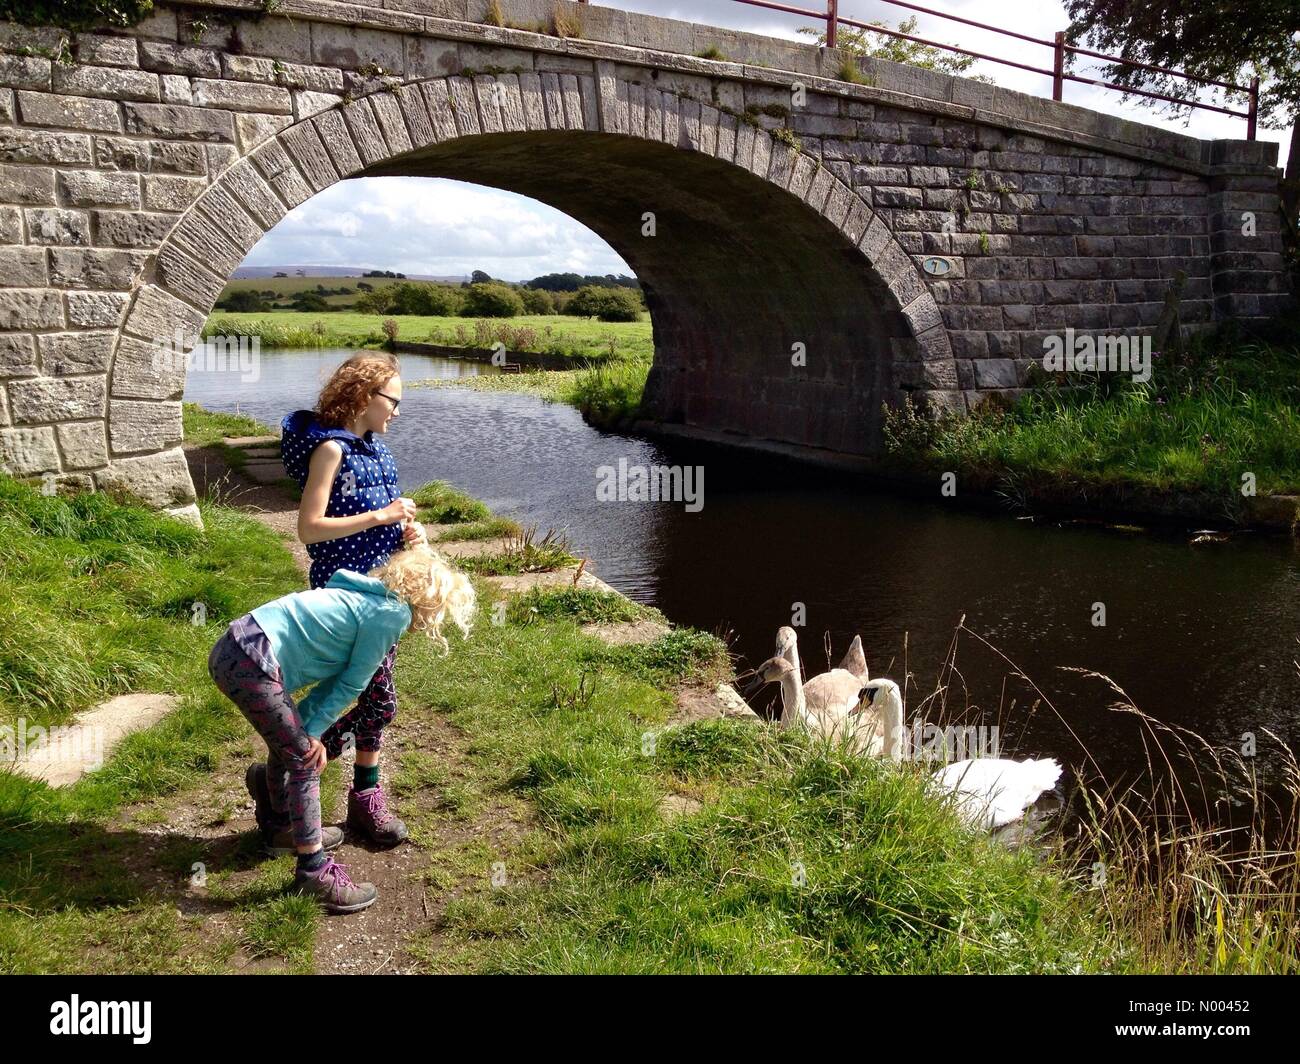 UK Weather sunny but windy at Glasson Dock near Lancaster in Lancashire. Two young girls looking at swans on Lancaster canal. Stock Photo